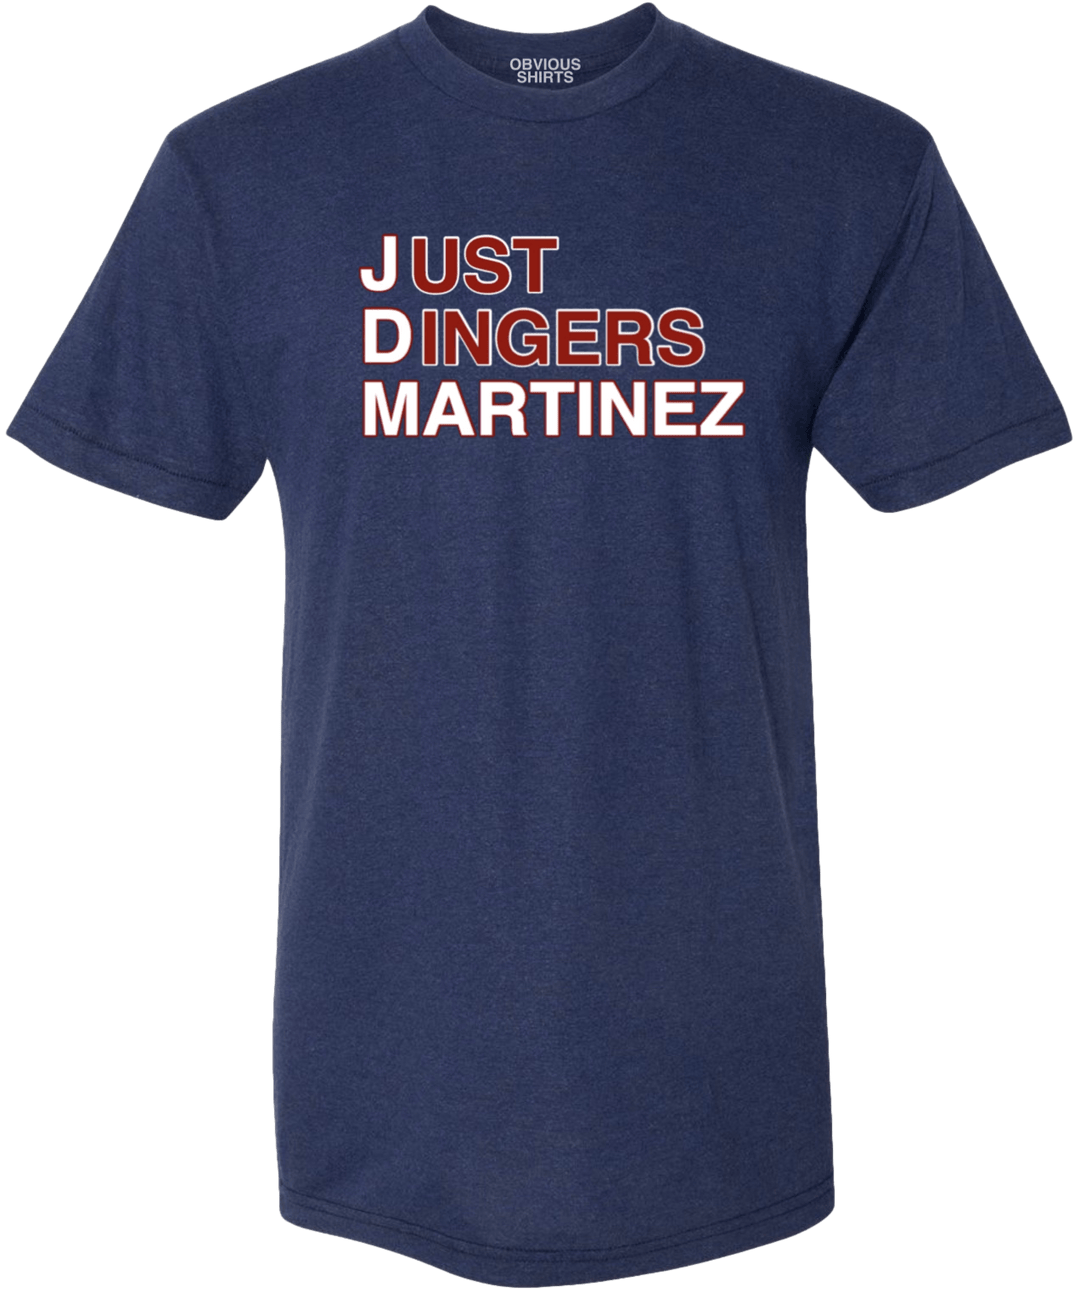 JUST DINGERS MARTINEZ - OBVIOUS SHIRTS.